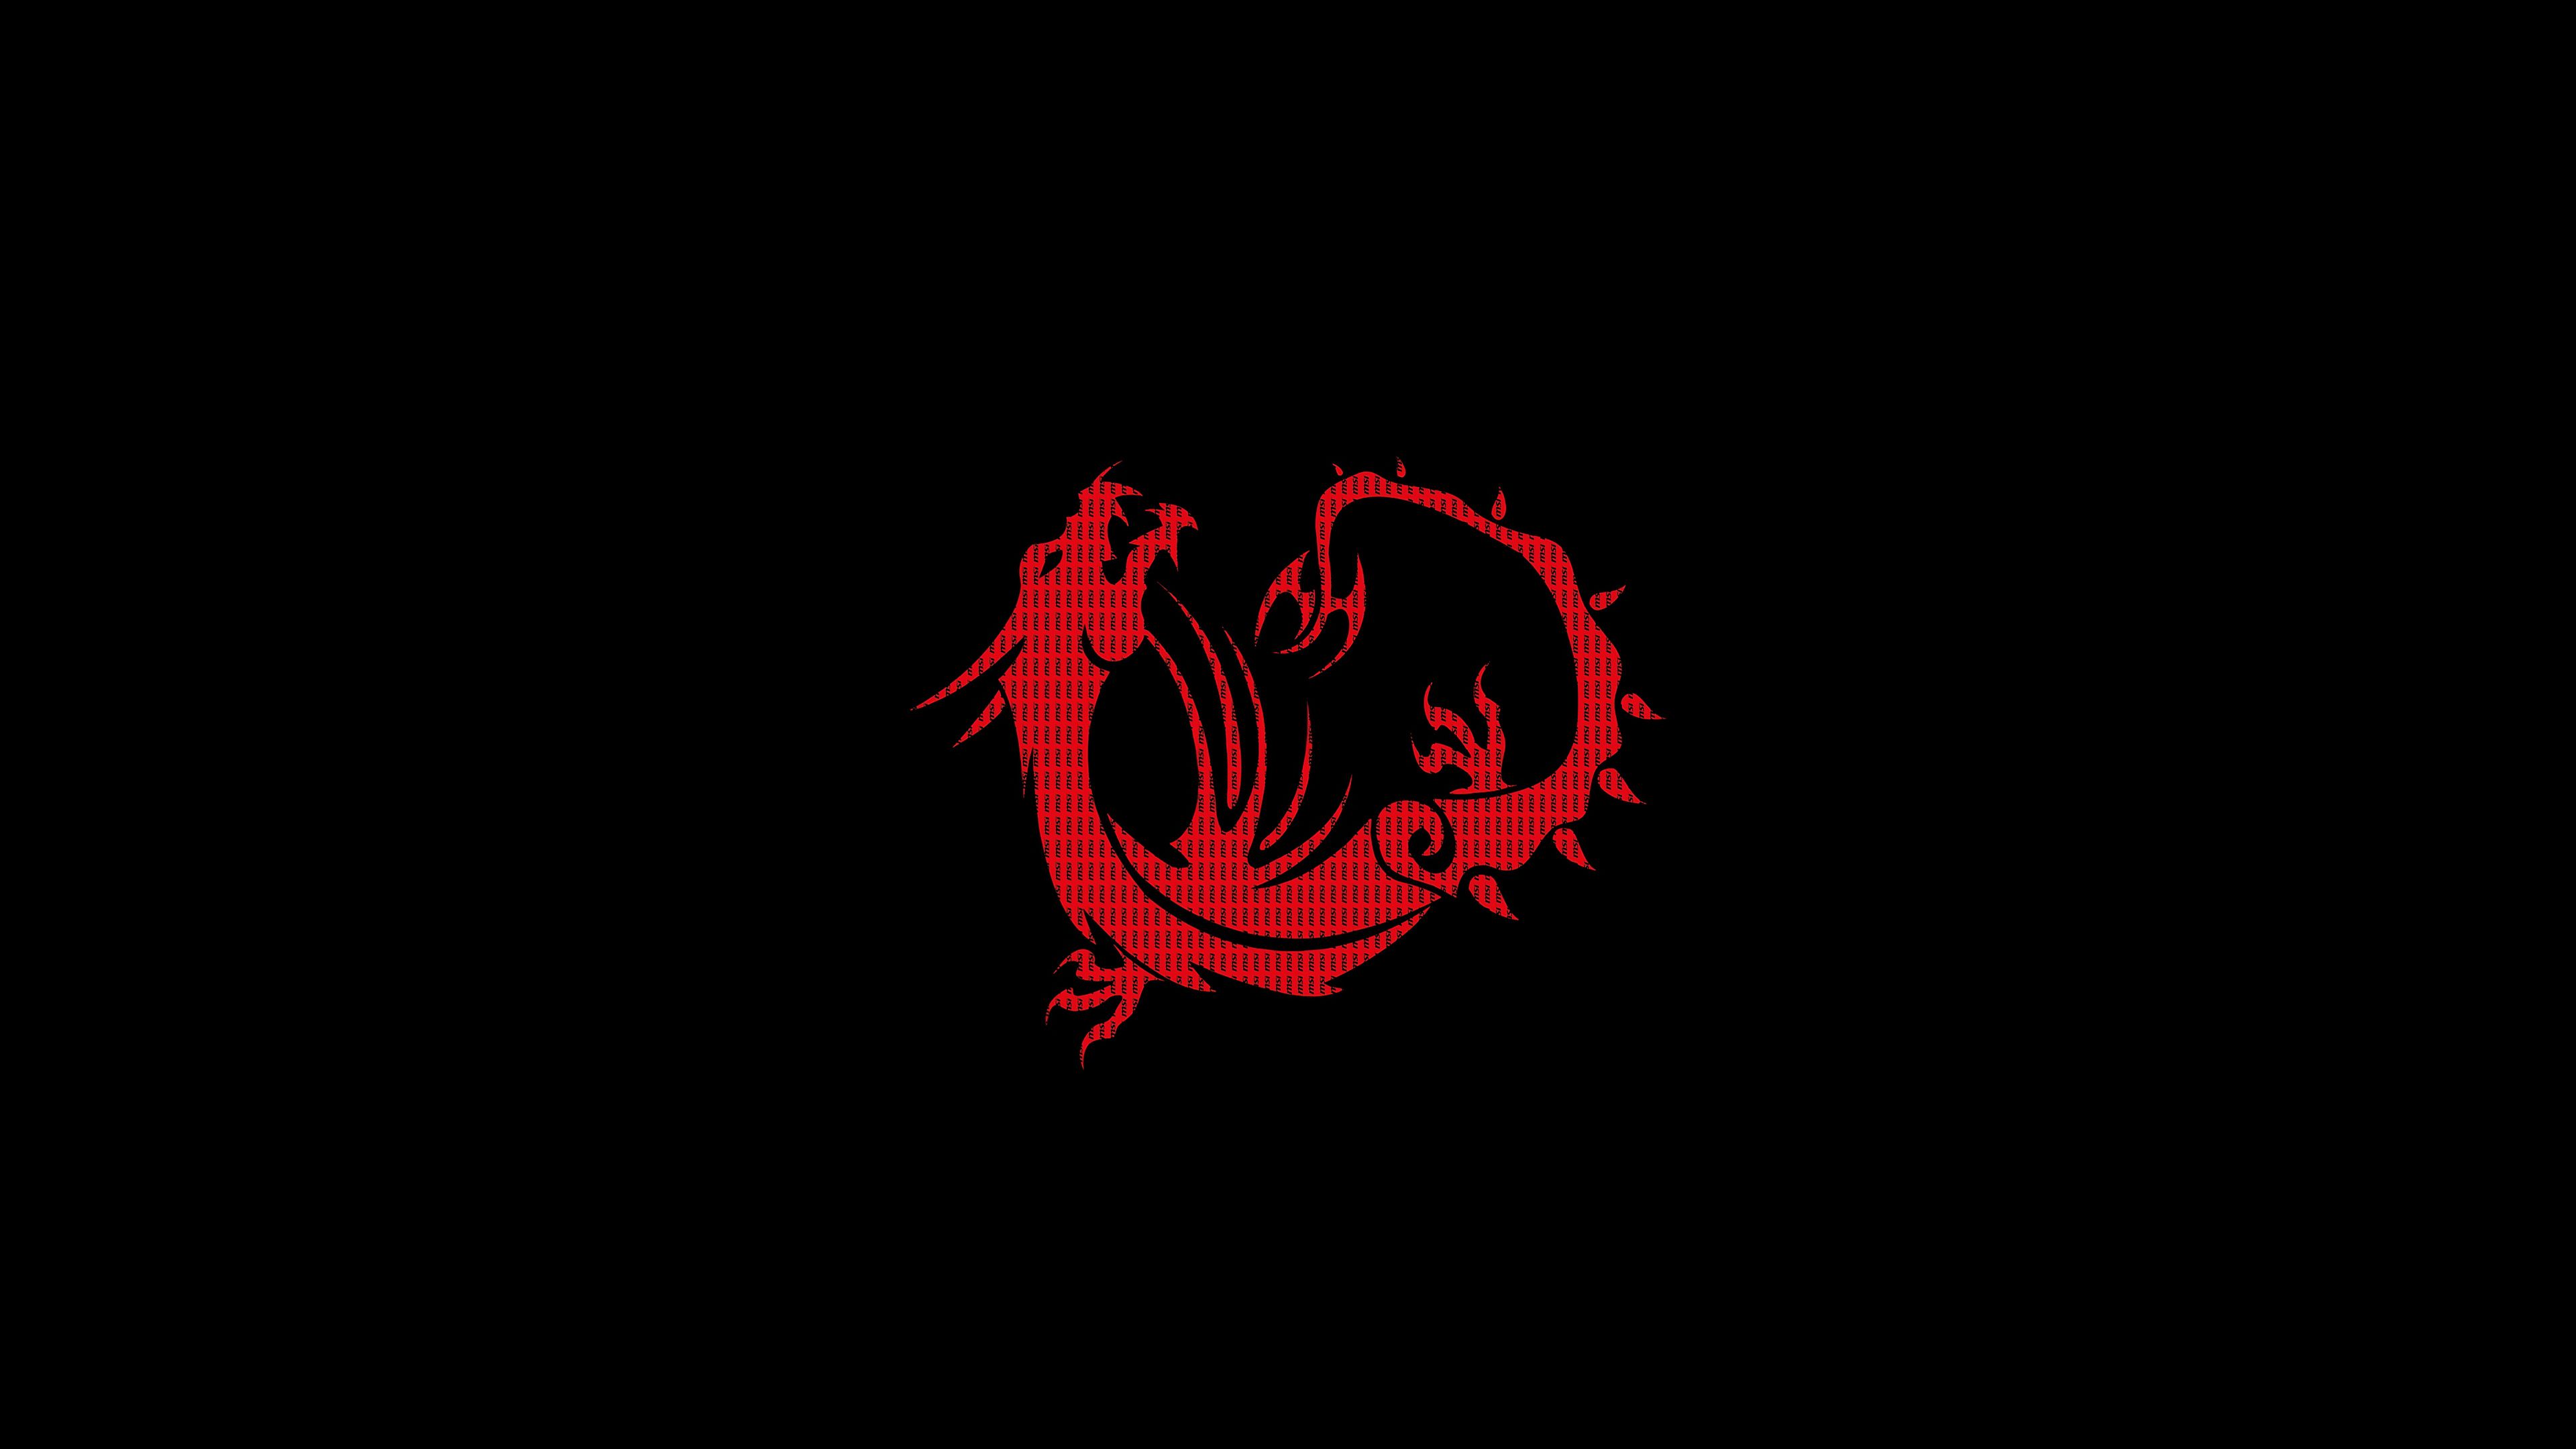 Red Dragon Black Minimal 4k, HD Artist, 4k Wallpaper, Image, Background, Photo and Picture